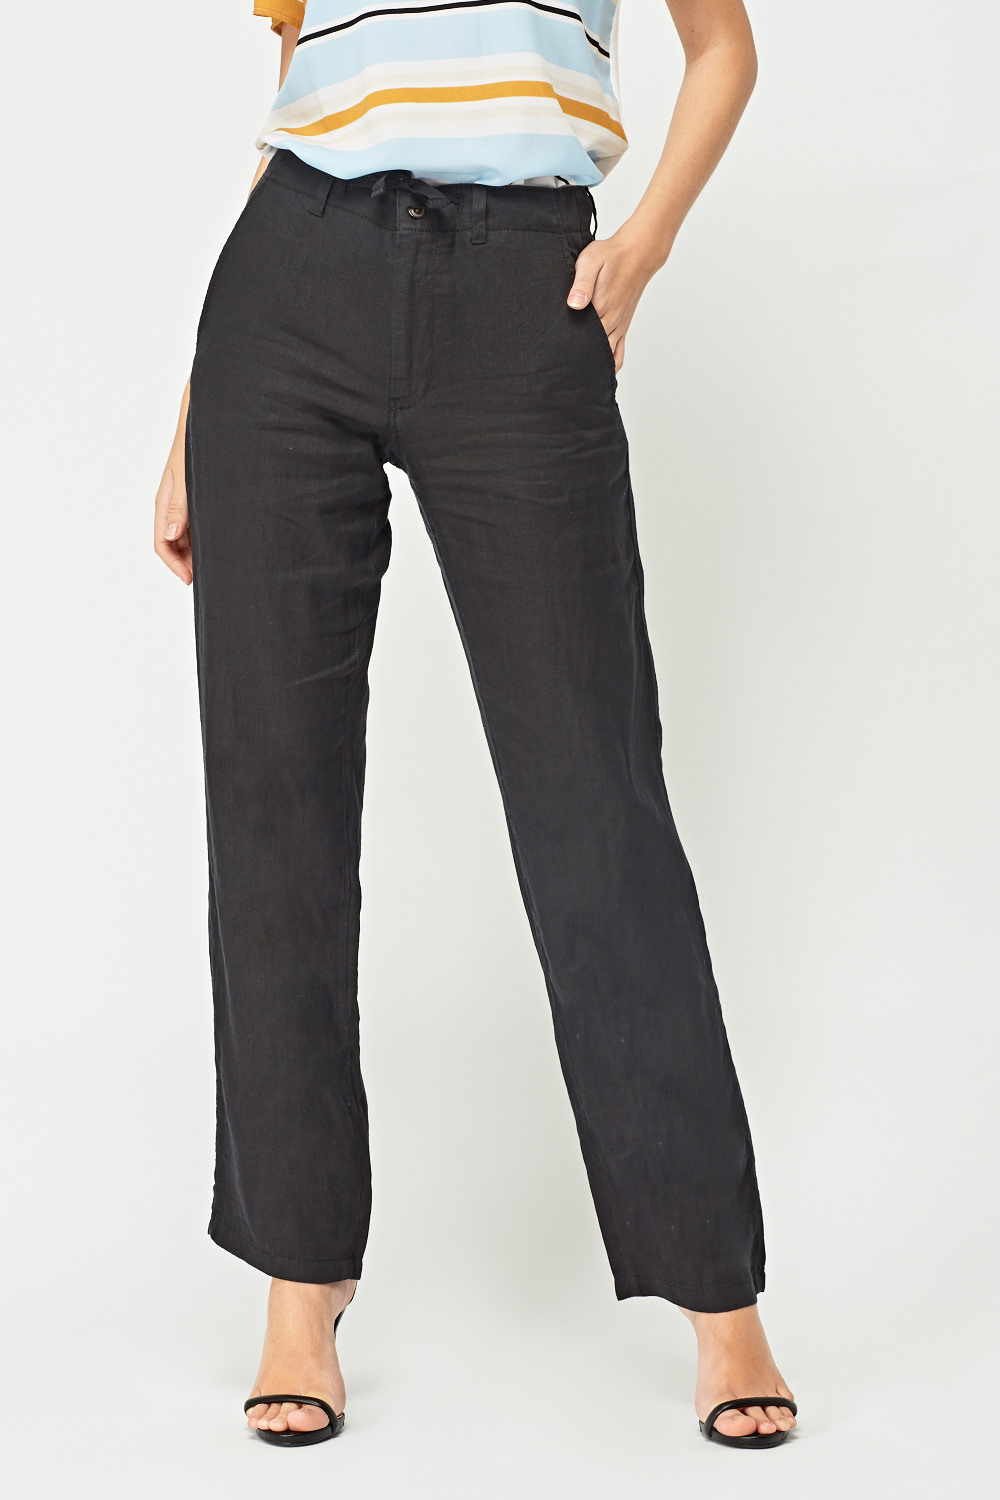 Basic Straight Cut Trousers - Just $7